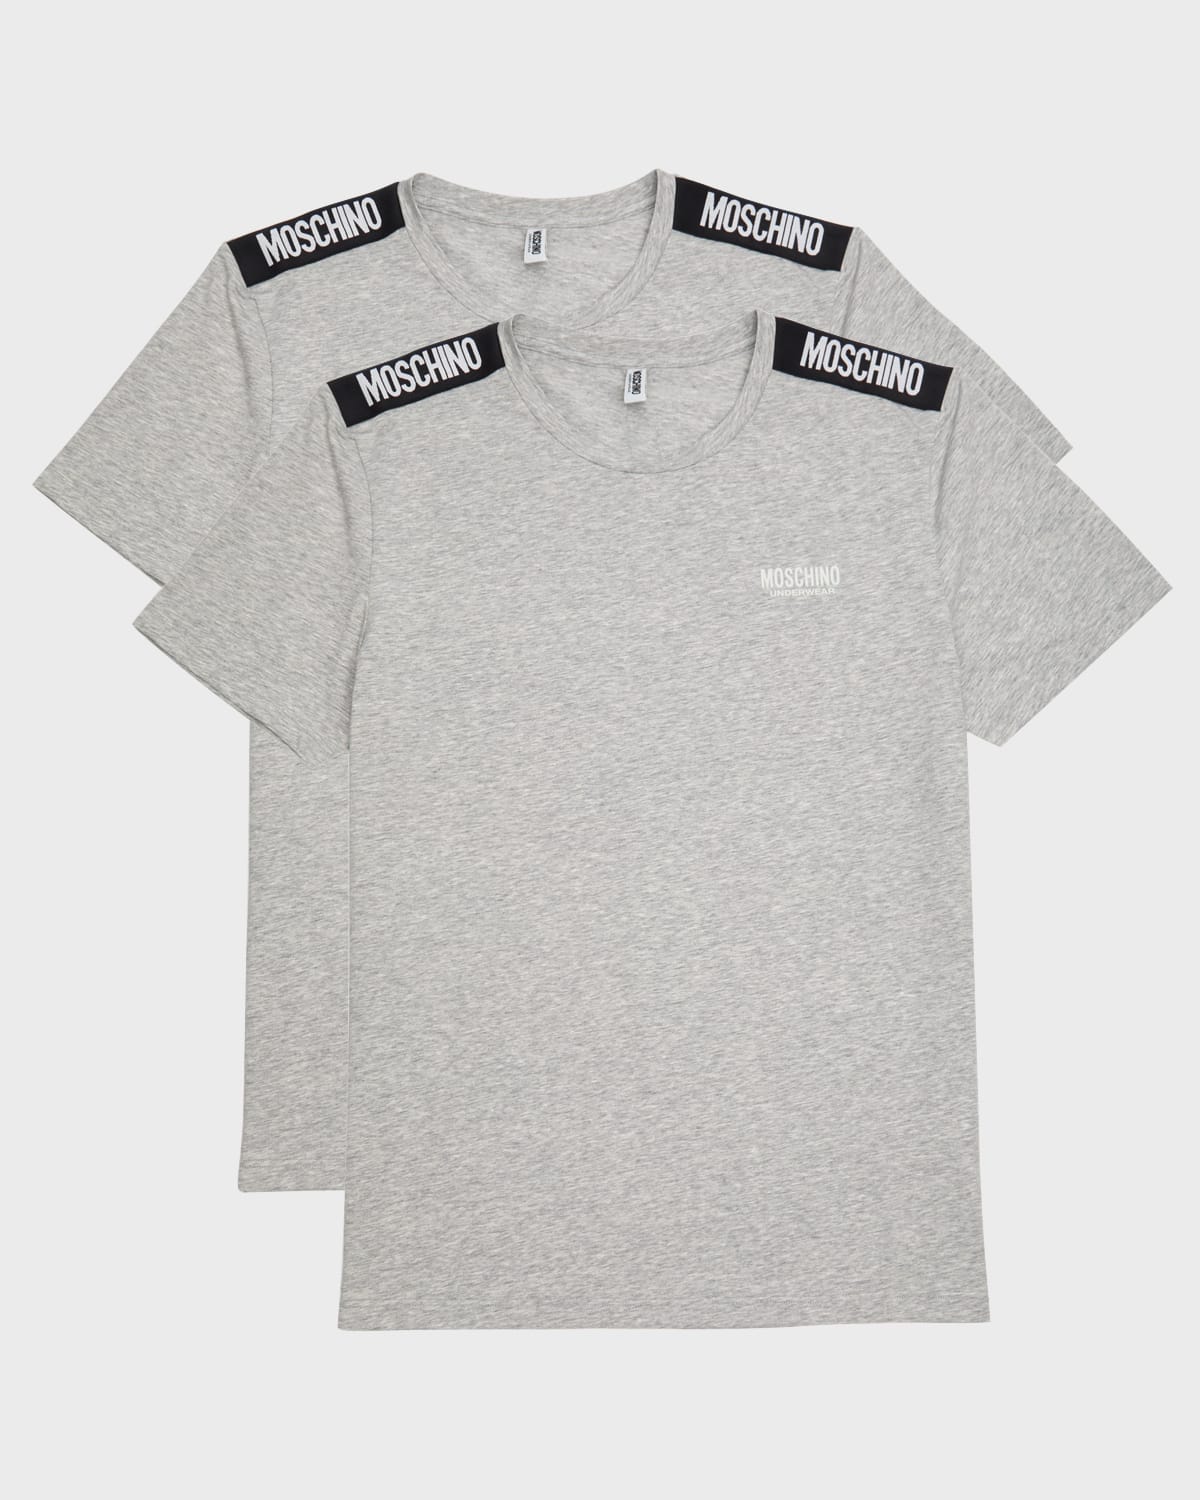 Moschino Men's T-shirt With Shoulder Taping In Grey